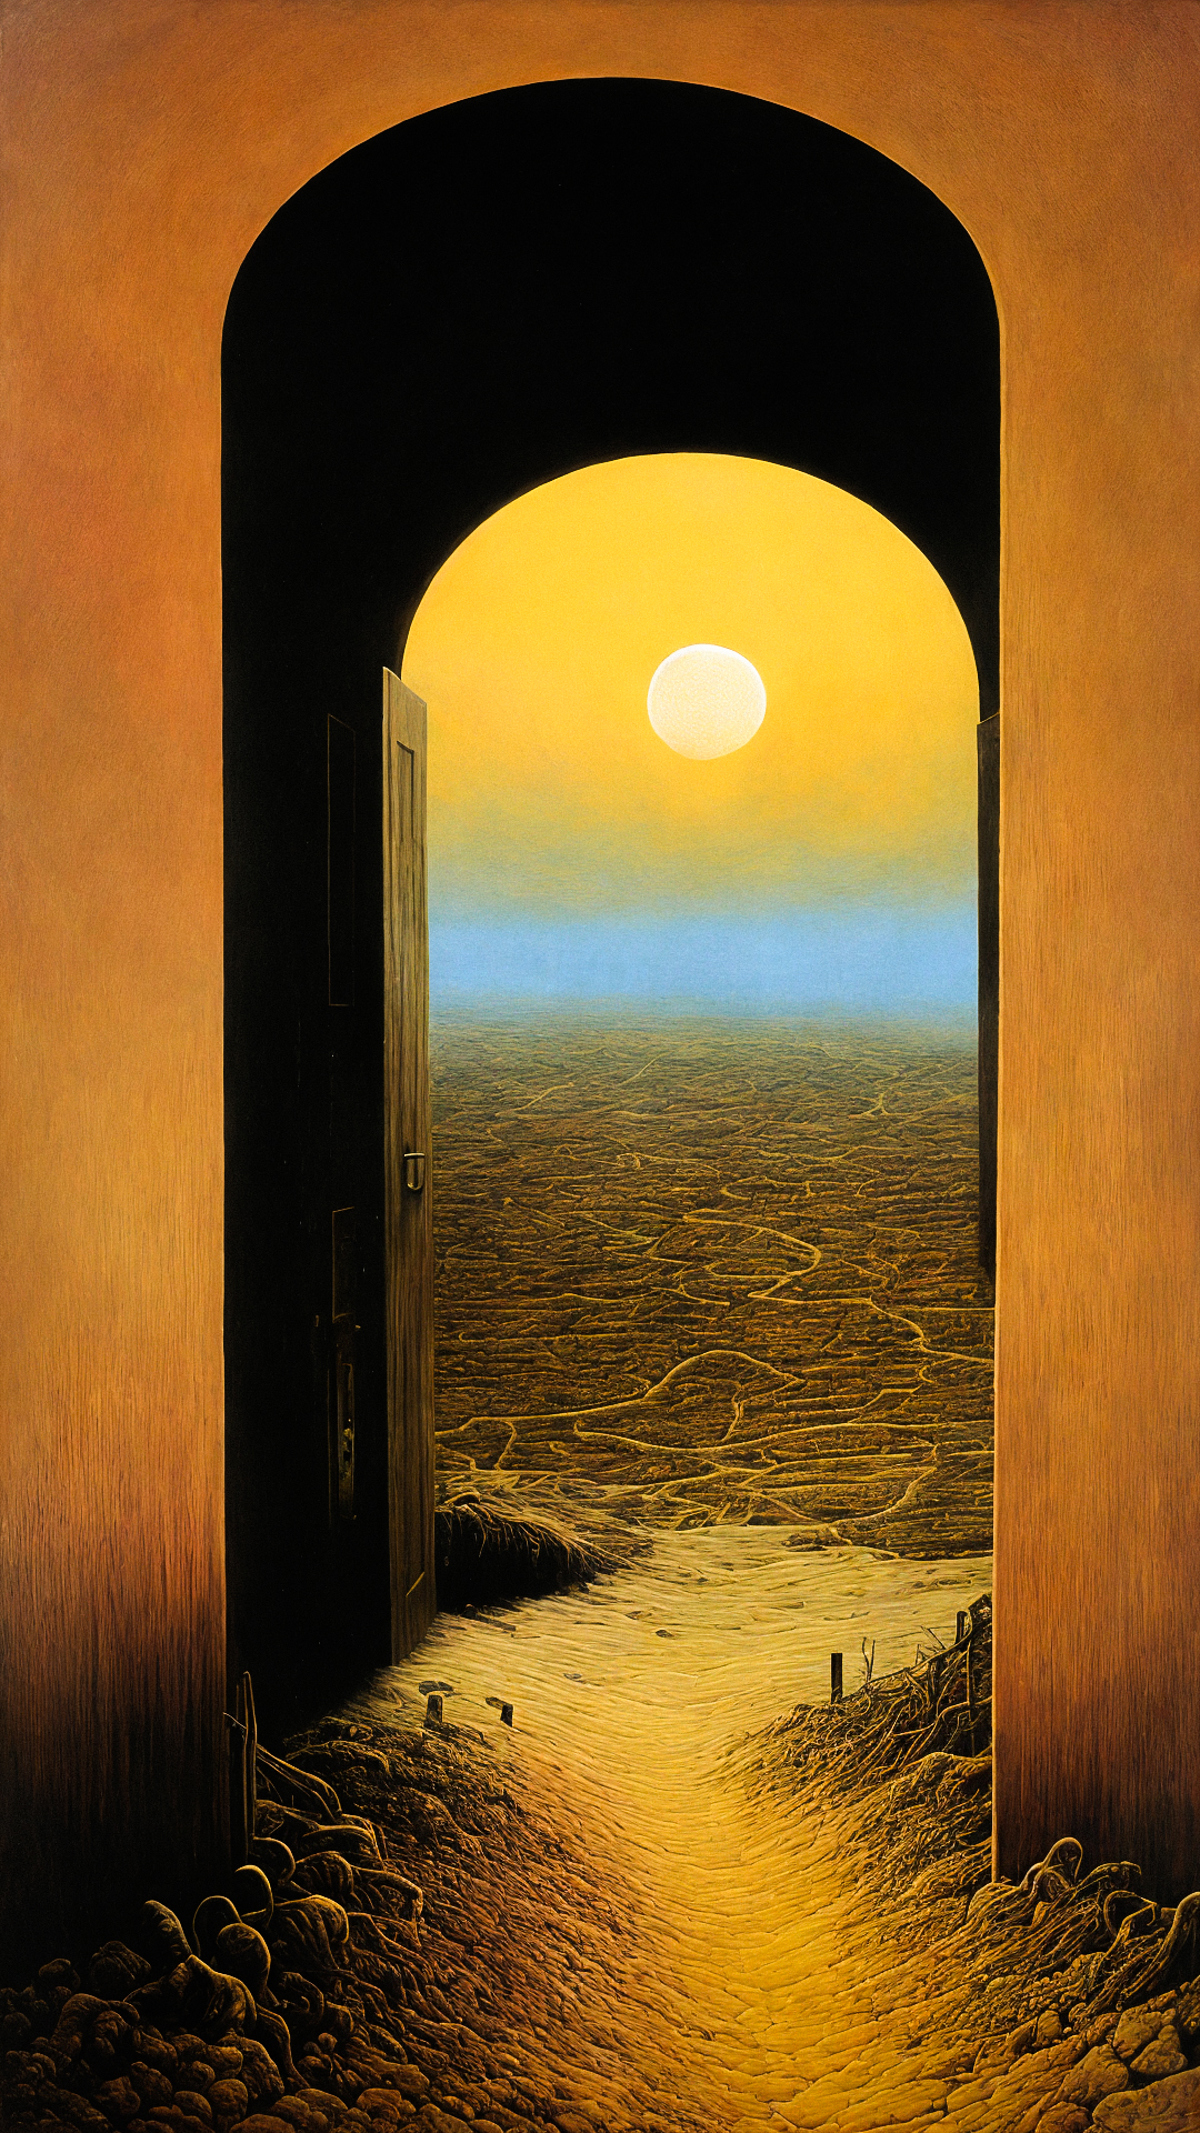 A doorway with a stunning view of a sunset and a desert landscape.